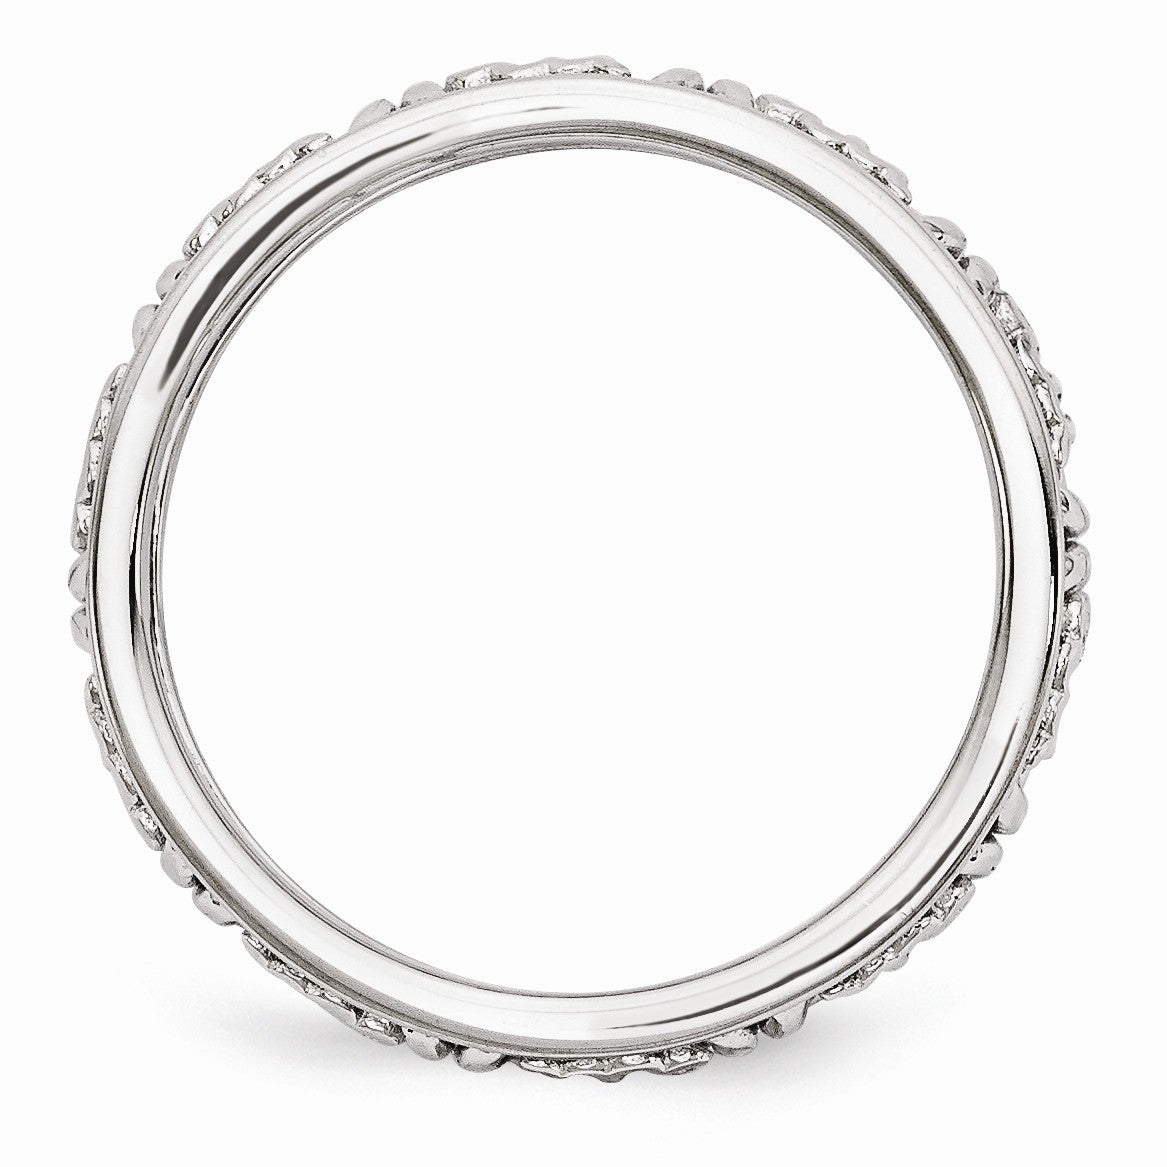 Alternate view of the 4mm Sterling Silver Stackable Expressions Virgo Zodiac Ring by The Black Bow Jewelry Co.